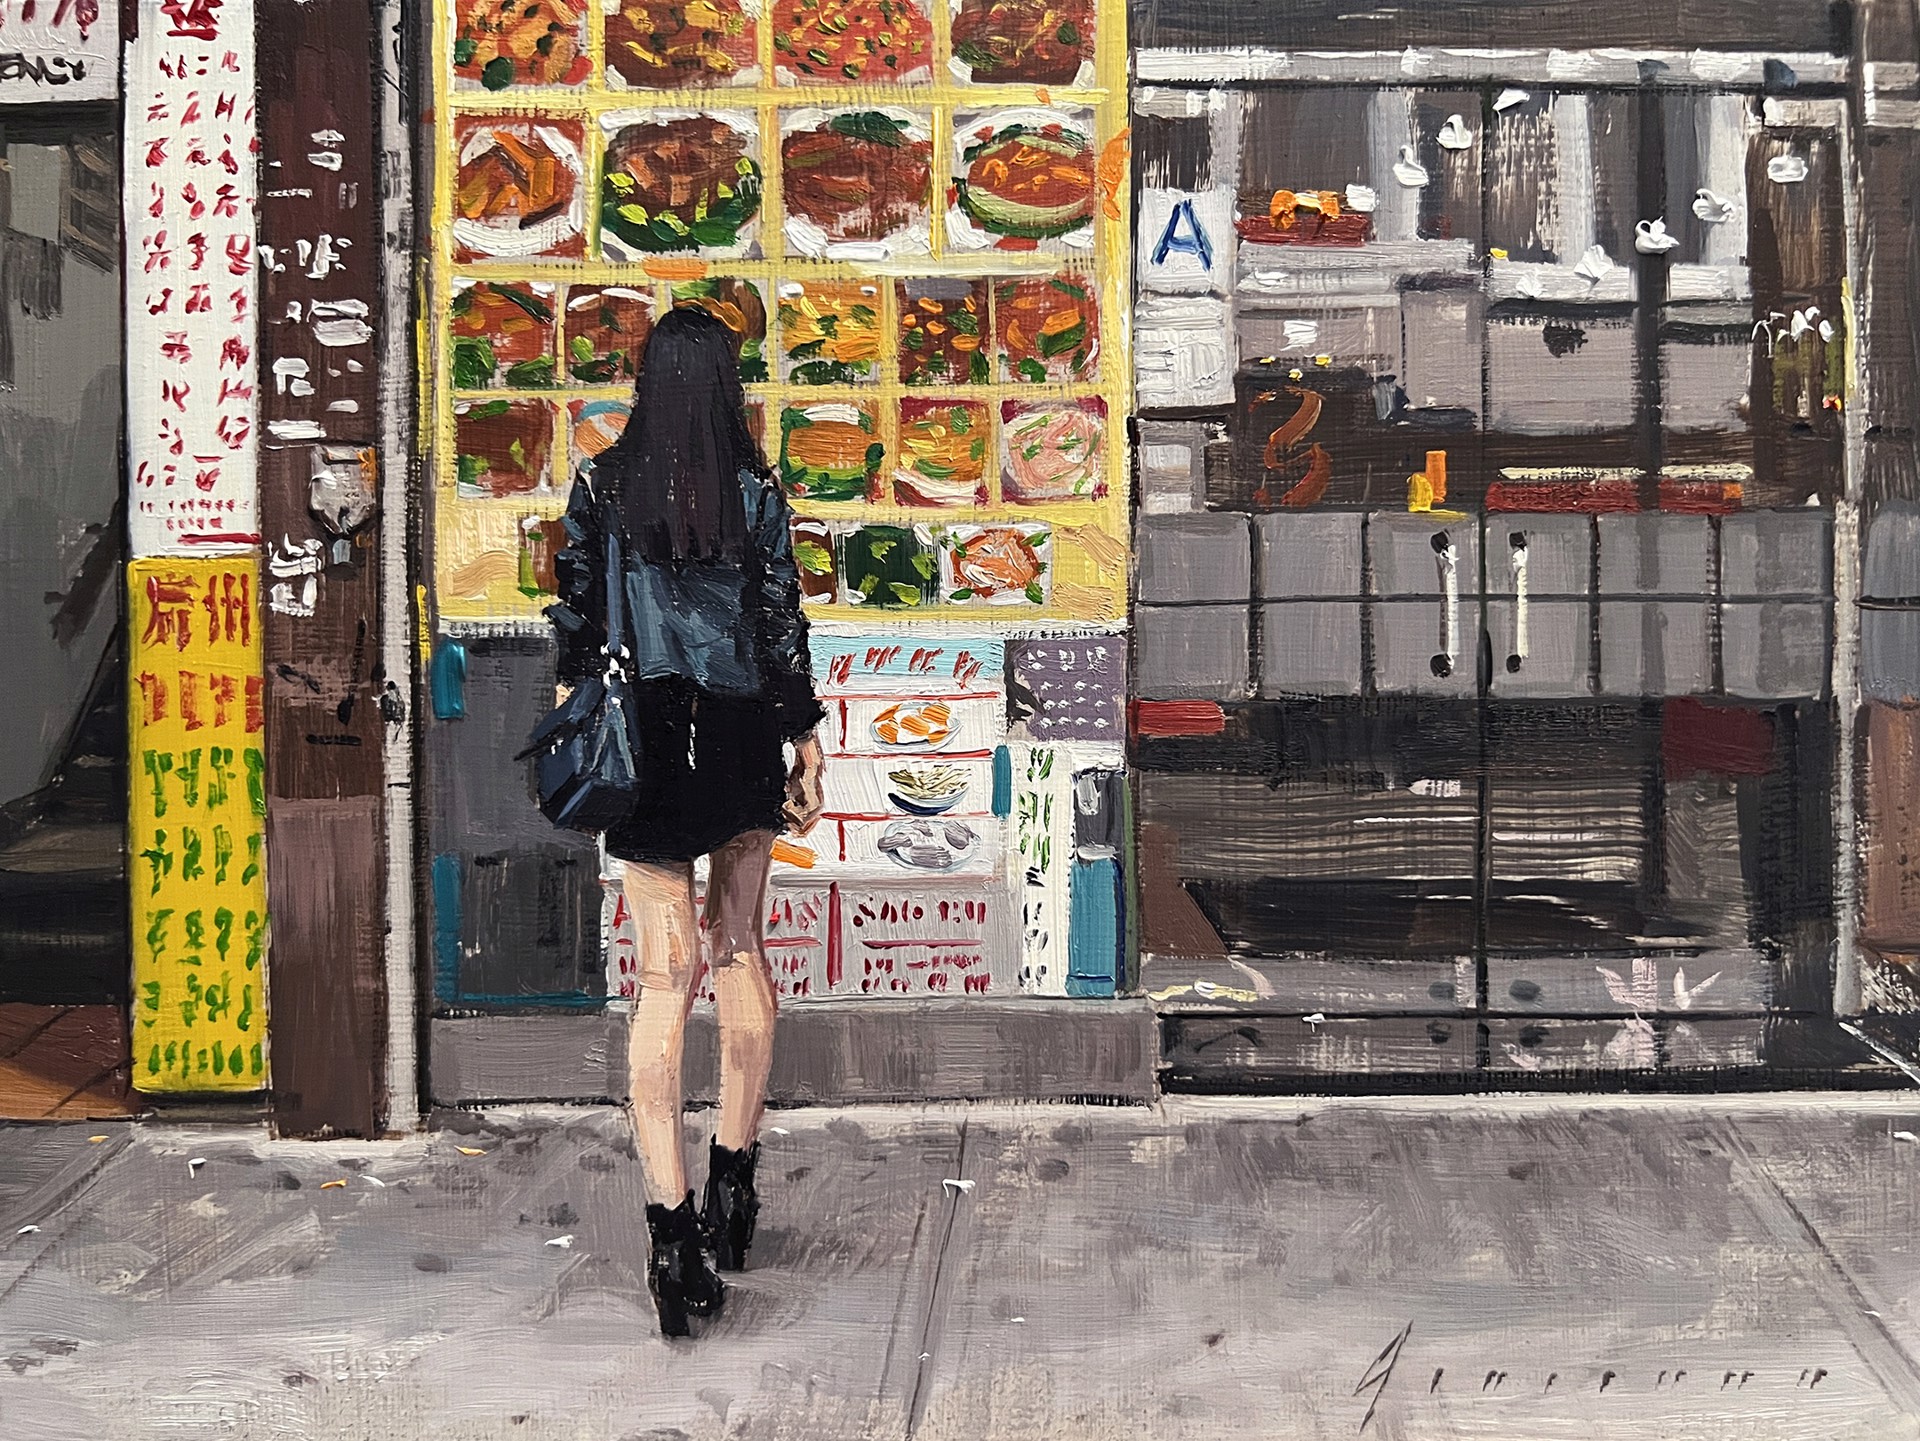 Andreea in Chinatown by Vincent Giarrano